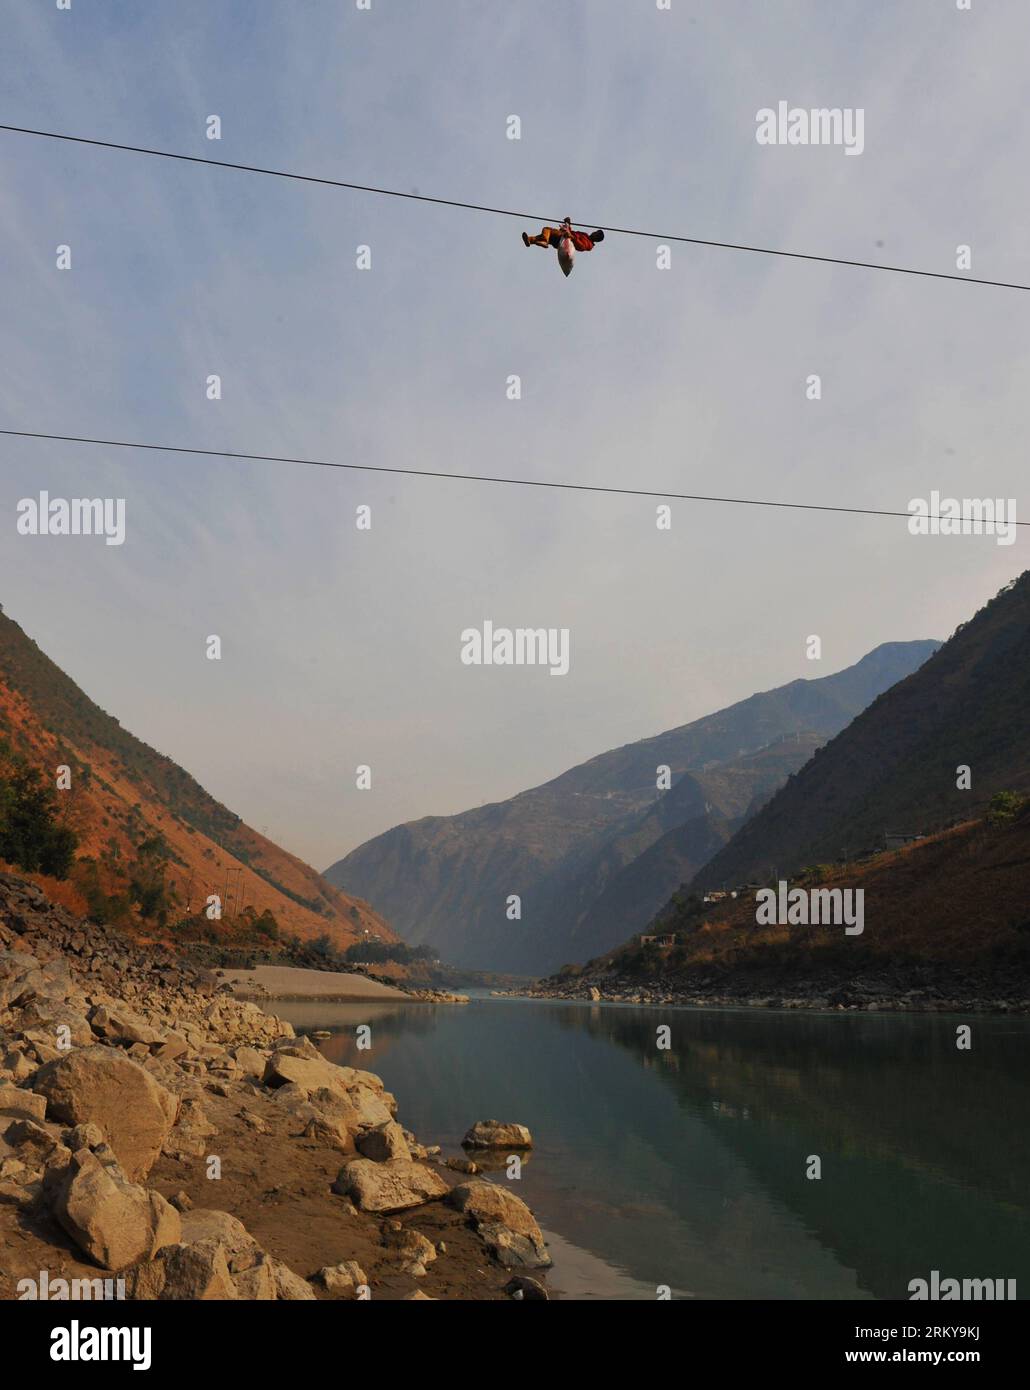 Bildnummer: 59176874  Datum: 02.02.2013  Copyright: imago/Xinhua (130205) -- KUNMING, Feb. 2, 2013 (Xinhua) -- A resident from Shuangmidi Village crosses the Nujiang River via a zip-line in Liuku County of Nujiang Lisu Autonomous Prefecture, southwest China s Yunnan Province, Feb. 2, 2013. More than 98 percent of Nujiang Lisu Autonomous Prefecture is occupied by mountains and valleys. The zip-lines have been quite popular transportation method along the Nujiang River since the ancient time. However, as transport conditions improve in recent years, a growing number of traditional zip-lines alon Stock Photo